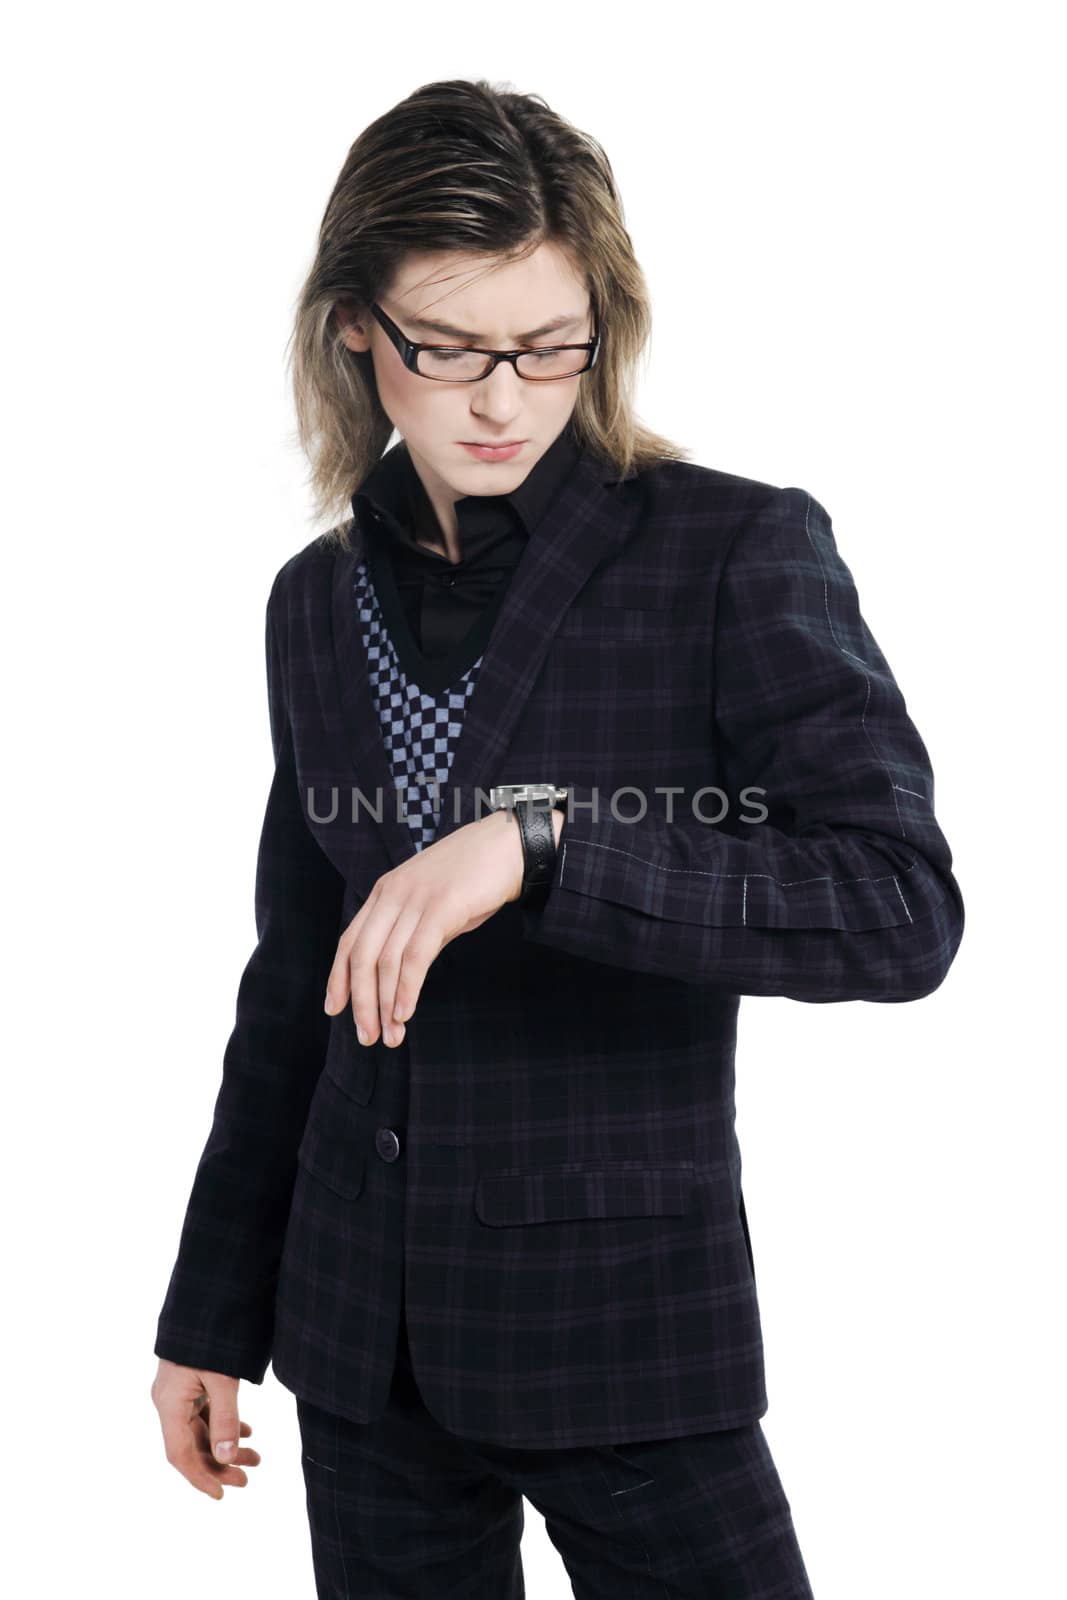 young man of looking at the watch on the white background
